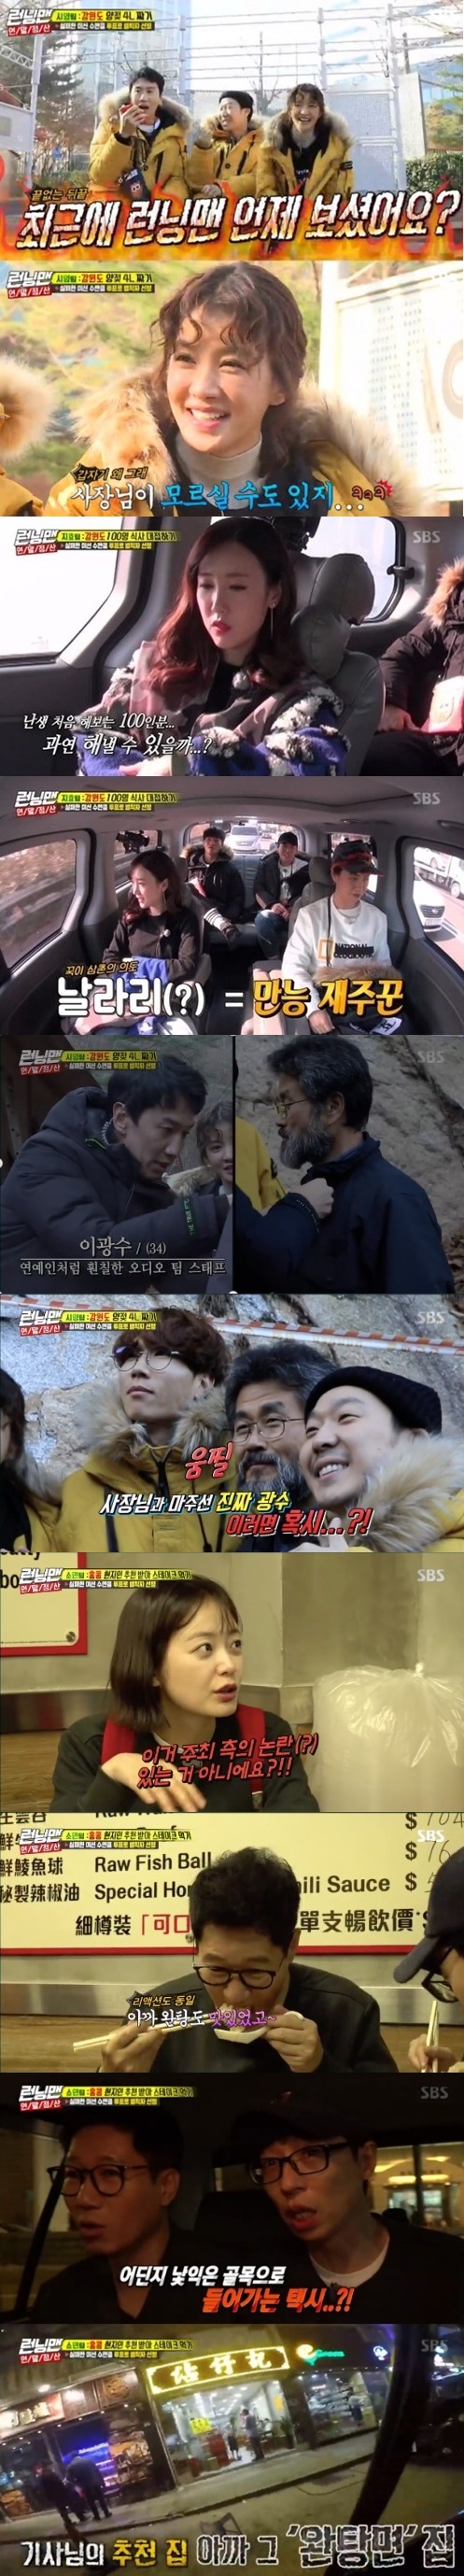 SBS Running Man has gained a ratings rise.According to Nielsen Korea, a ratings agency on the 10th, Running Man, which was broadcast on the afternoon of the 9th, rose to 5.5% in the first part of the average audience rating and 8.7% in the second part (based on the audience rating of households in the metropolitan area) from last week, and 2049 target audience rating, an important indicator of major advertising officials, jumped to 4.3%.On this day, actor Lee Si-young appeared as a guest as a special feature of mission year-end settlement: loser resurrection race which re-enters the failure mission among the global missions that the members have been conducting.The members were teamed up with Lee Si-young, Jeon So-min and Song Ji-hyo, respectively, and were divided into Hong Kong 1 team, Gangwon Province and South Korea 2 team.In the event of a mission failure, a penalty is received by selecting as many members as failed.With Lee Si-young and Song Ji-hyo teams deciding on the Gangwon Province, South Korea, among the three teams, Lee Si-youngs team had to weave 4L of milk on the ranch related to the king.Lee Kwang-soo, who first took the voting rights and tested his awareness, did not recognize the rancher and tasted the humiliation of losing the voting rights to Haha and Lee Si-young.To make matters worse, Lee Si-youngs team predicted a tough mission as the flocks kept running away in fear.Song Ji-hyo team challenged Courage to 100 missionWhile the singer star was invited as a surprise guest and cooked with Song Ji-hyo, Kim Jong-kook and Yang Se-chan also tested the intermittentness, but Kim Jong-kook only noticed and laughed.The Jeon So-min team confirmed the bad lucks run to Hong Kong.I had to eat steak restaurants for local people, and if I was recommended for food, not steak, I had to eat it and re-challenge it.However, the food recommended by the taxi driver and the 73-year-old grandmother was a complete noodle, and the members were surprised by the fate of Okinawa.The scene rose to a maximum of 9.9% per minute, taking the best minute.